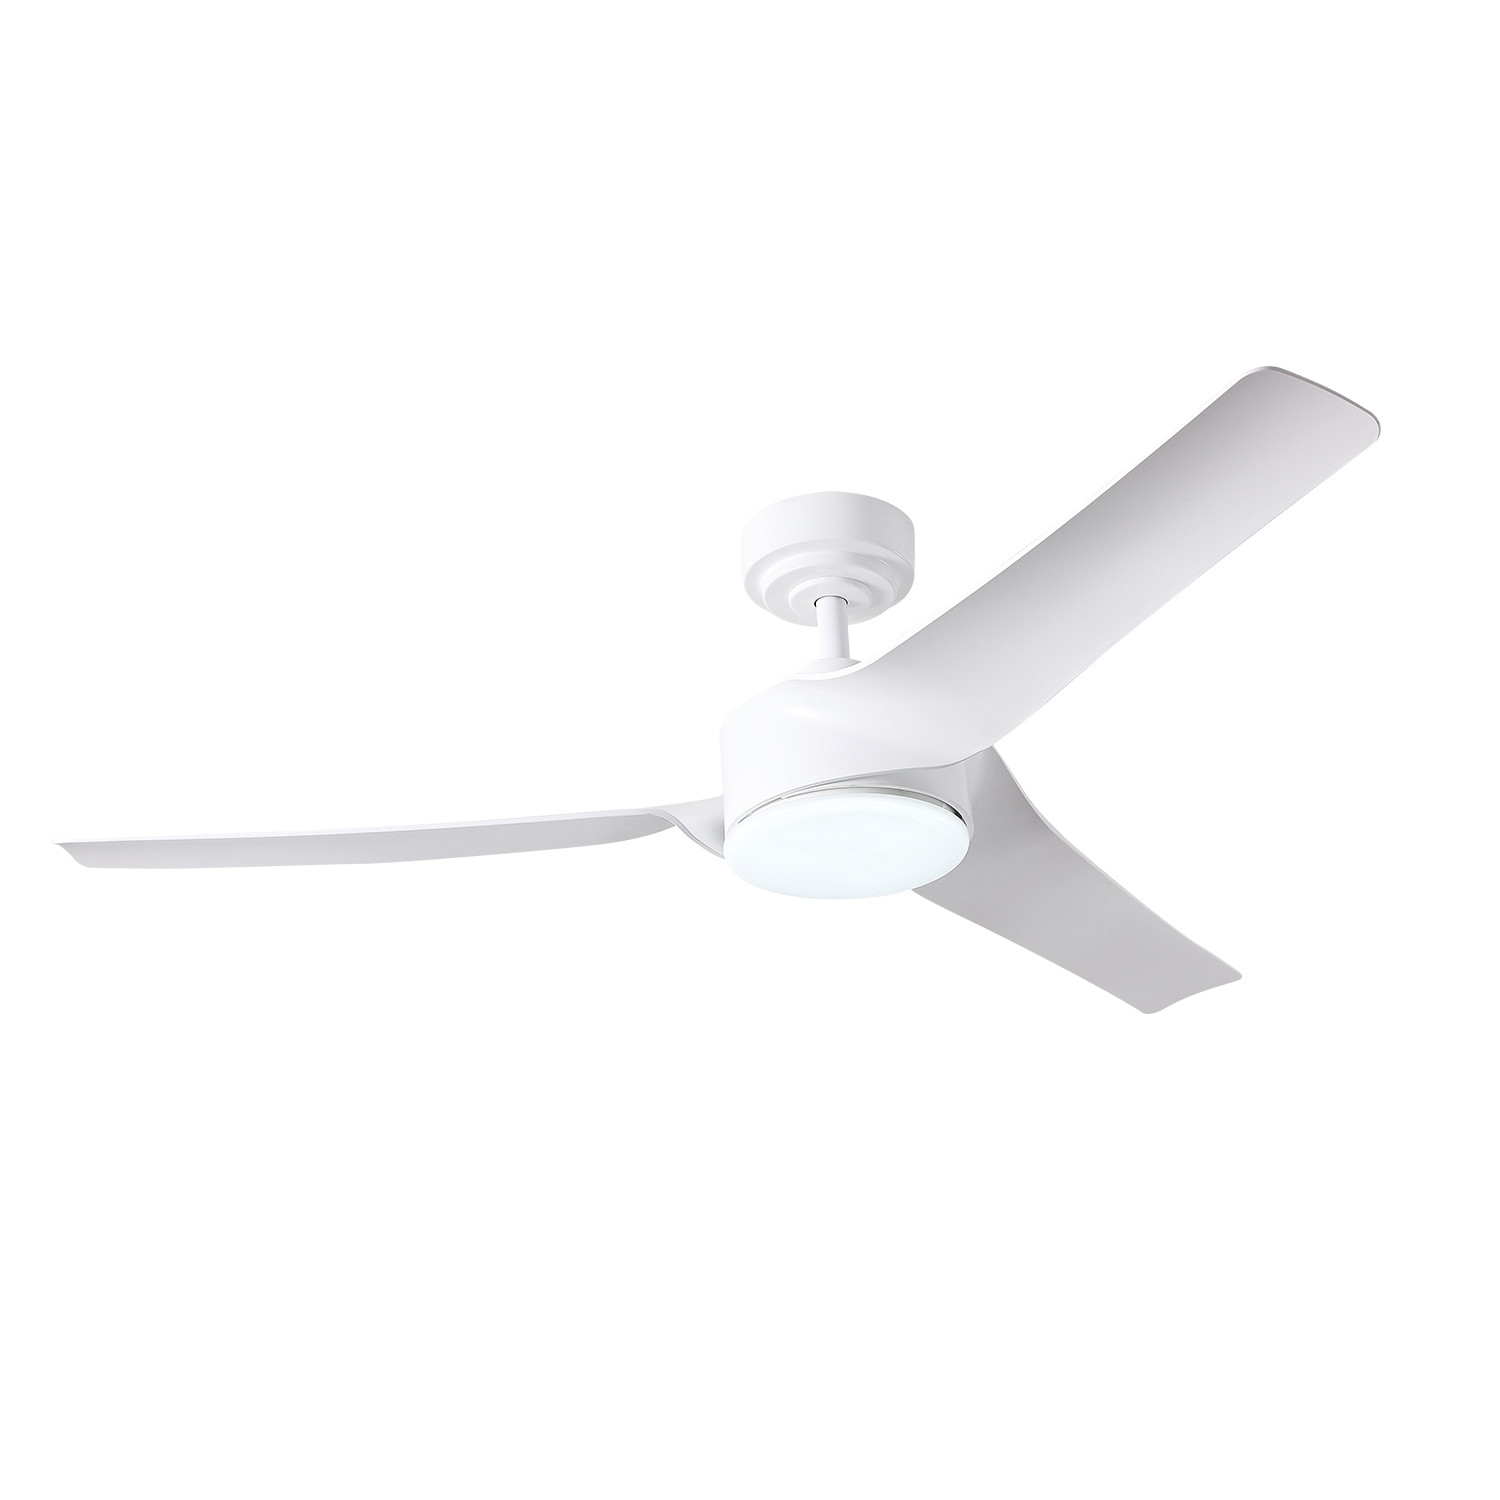 Discover the Ultimate Efficiency and Cooling Power of a 6-Blade Ceiling Fan